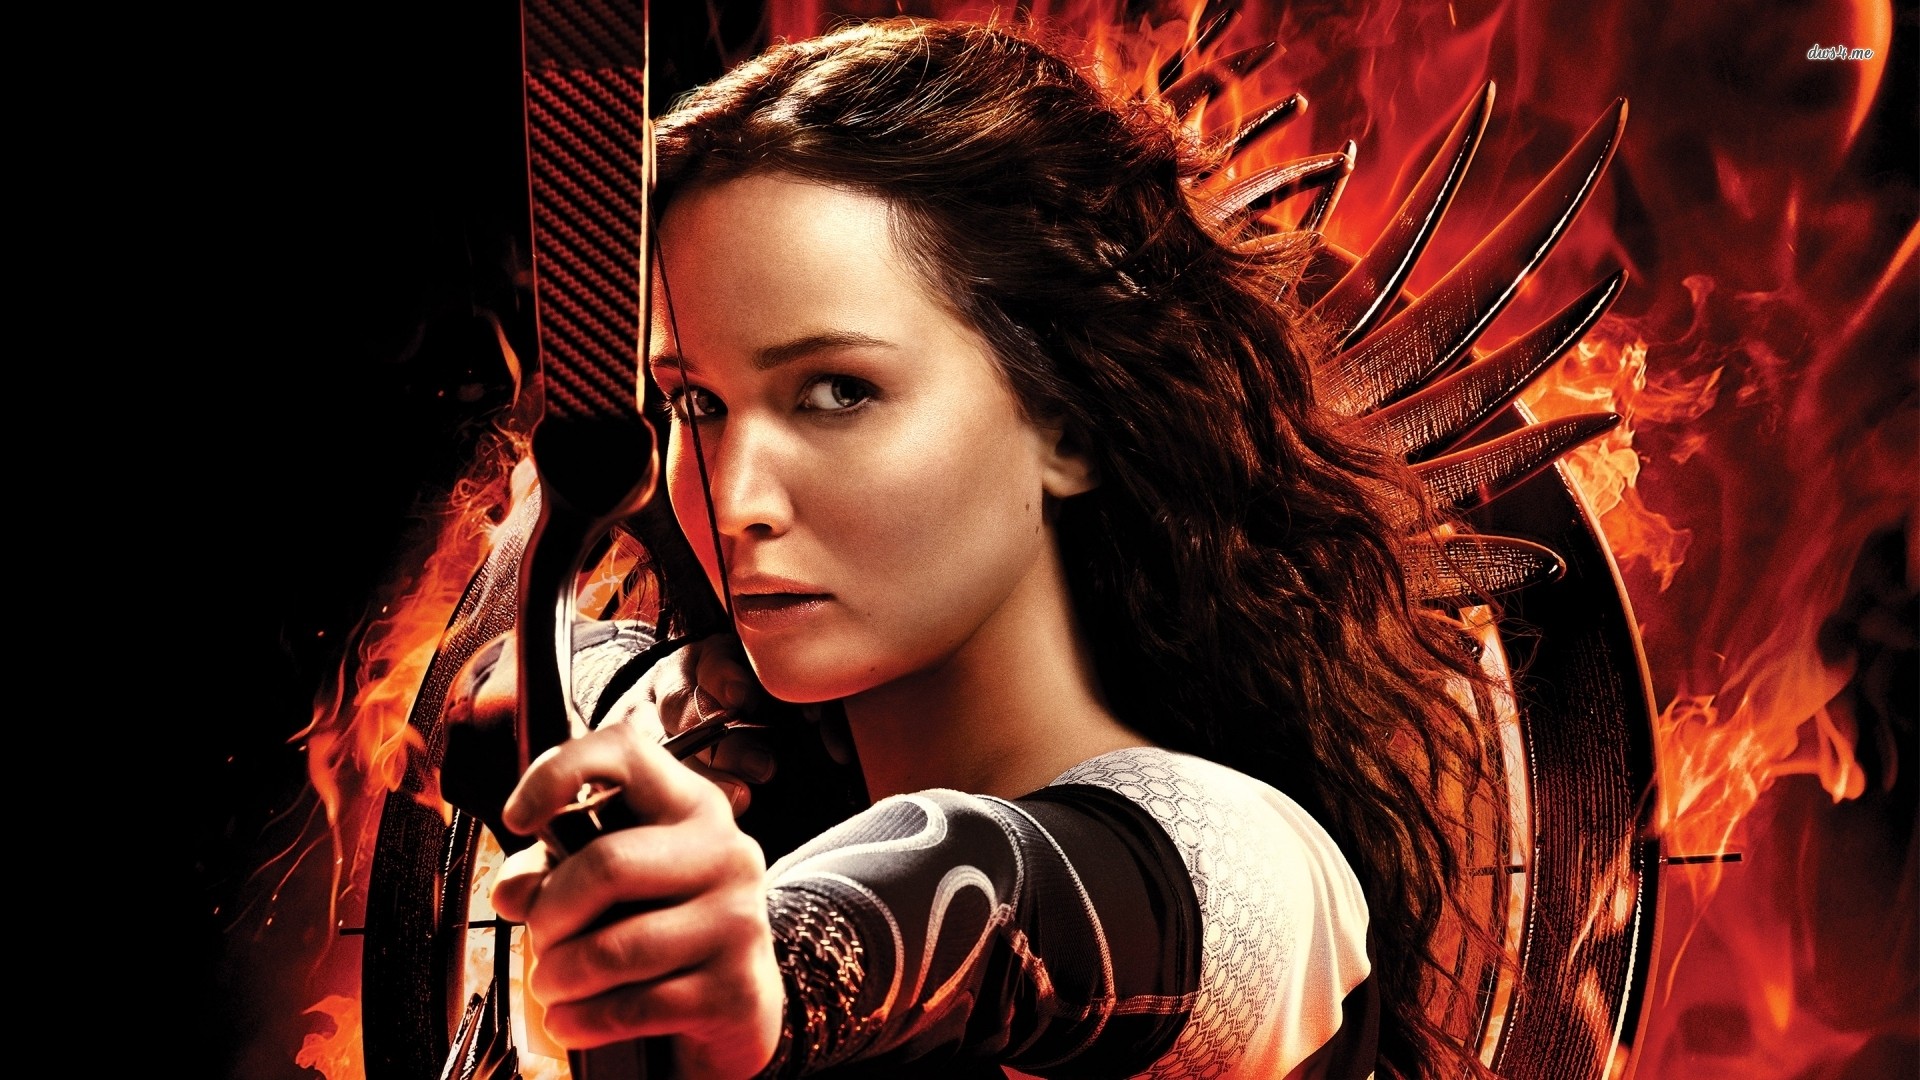 Hunger Games The Hunger Games Brunette Jennifer Lawrence Movies Archery 1920x1080